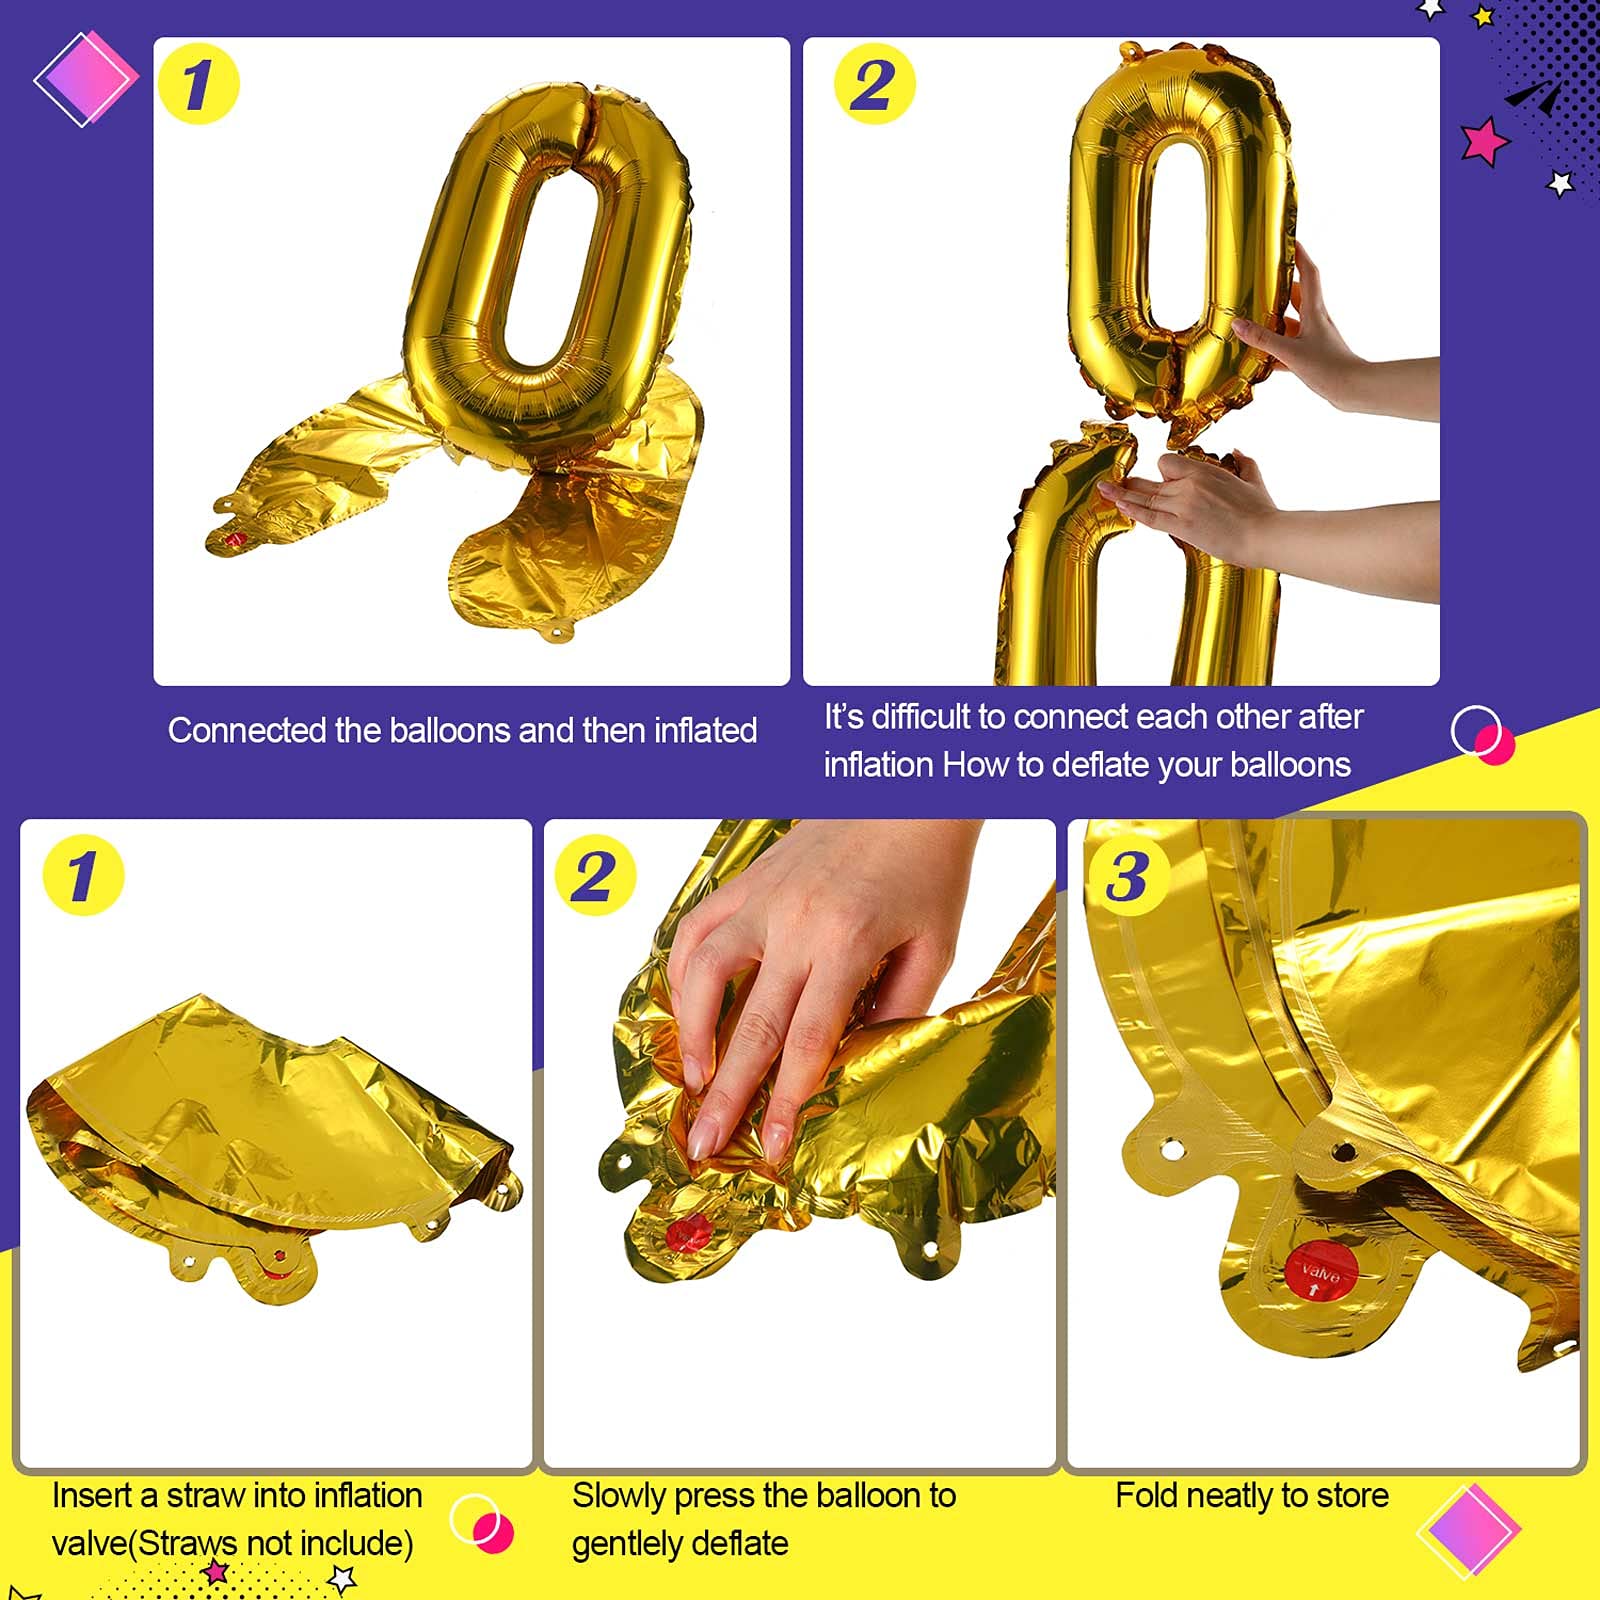 90s Party Decorations Supplies Includes Inflatable Radio Boombox Backdrop Inflatable Mobile Phone and 16 Inch Gold Foil Chain Balloons for Cosplay Prop Hip Hop Party